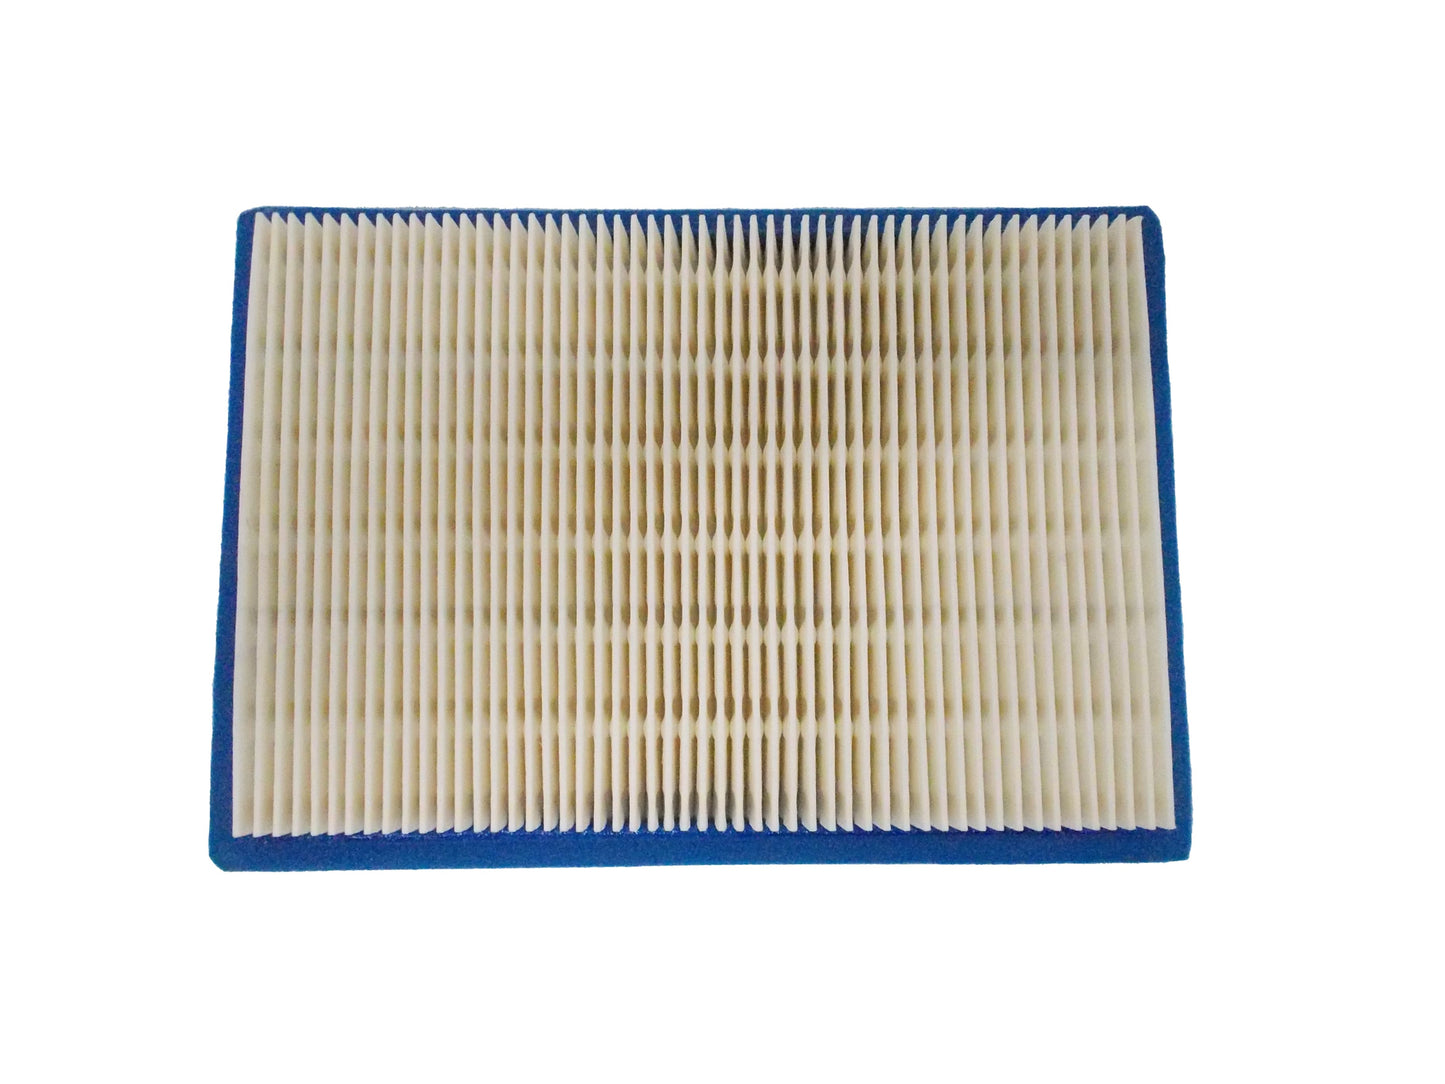 AIR FILTER REPLACES 397795 395027 4102 PT11025 LG397795S 30-700 2789 050406 90700 110700